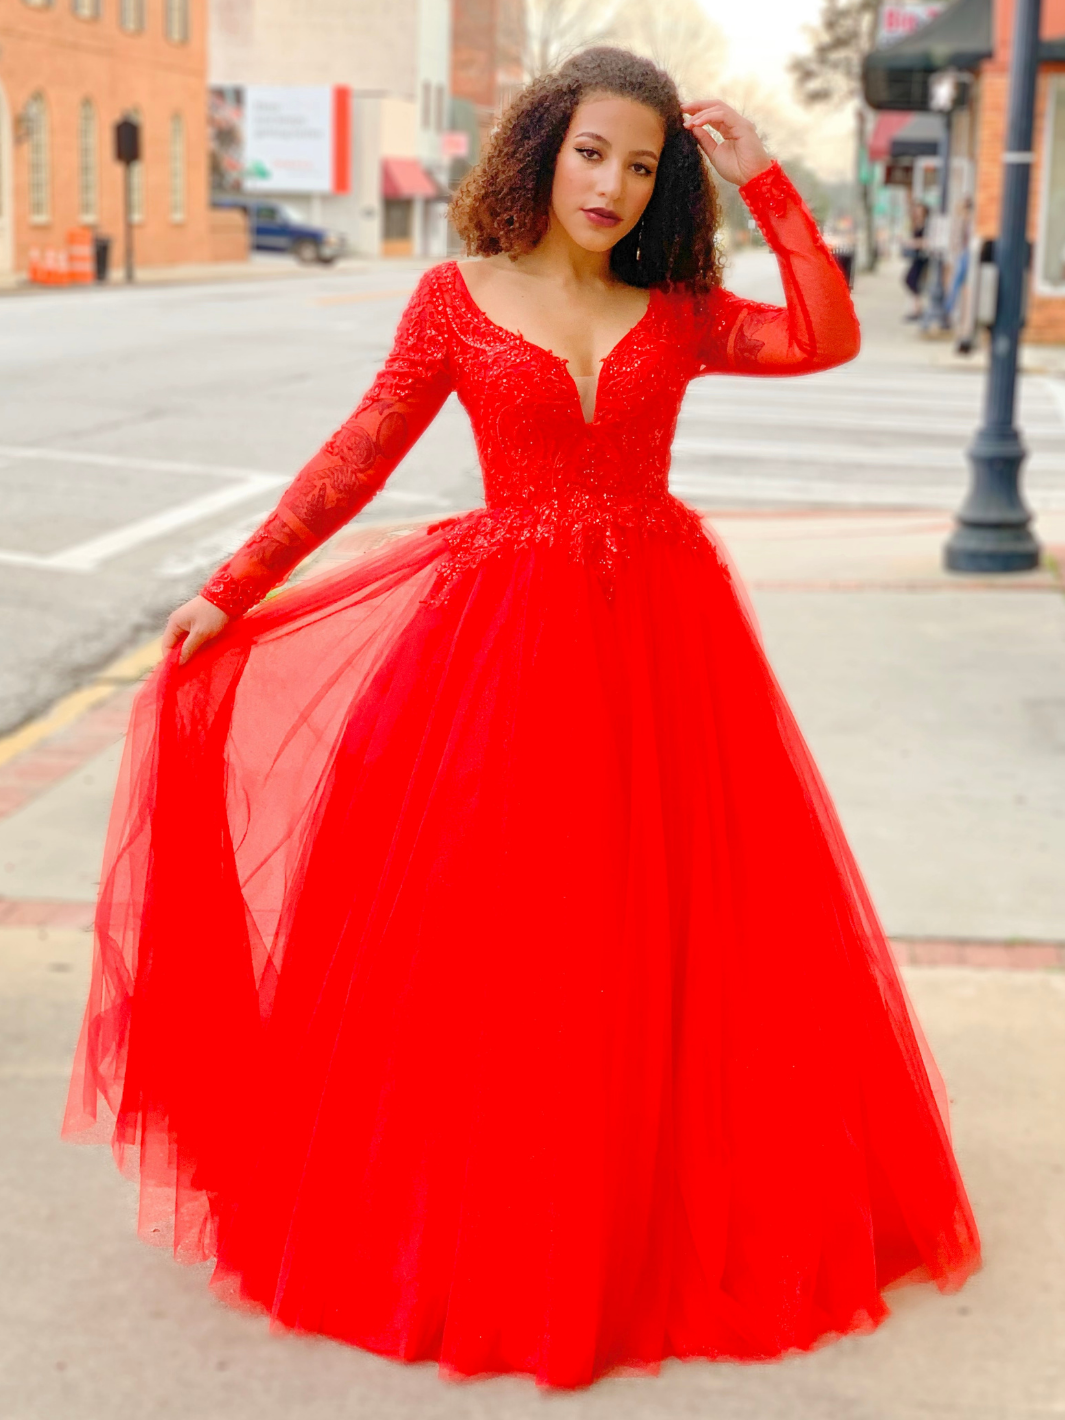 Red Tulle Sleeved Ballgown Prom Dress